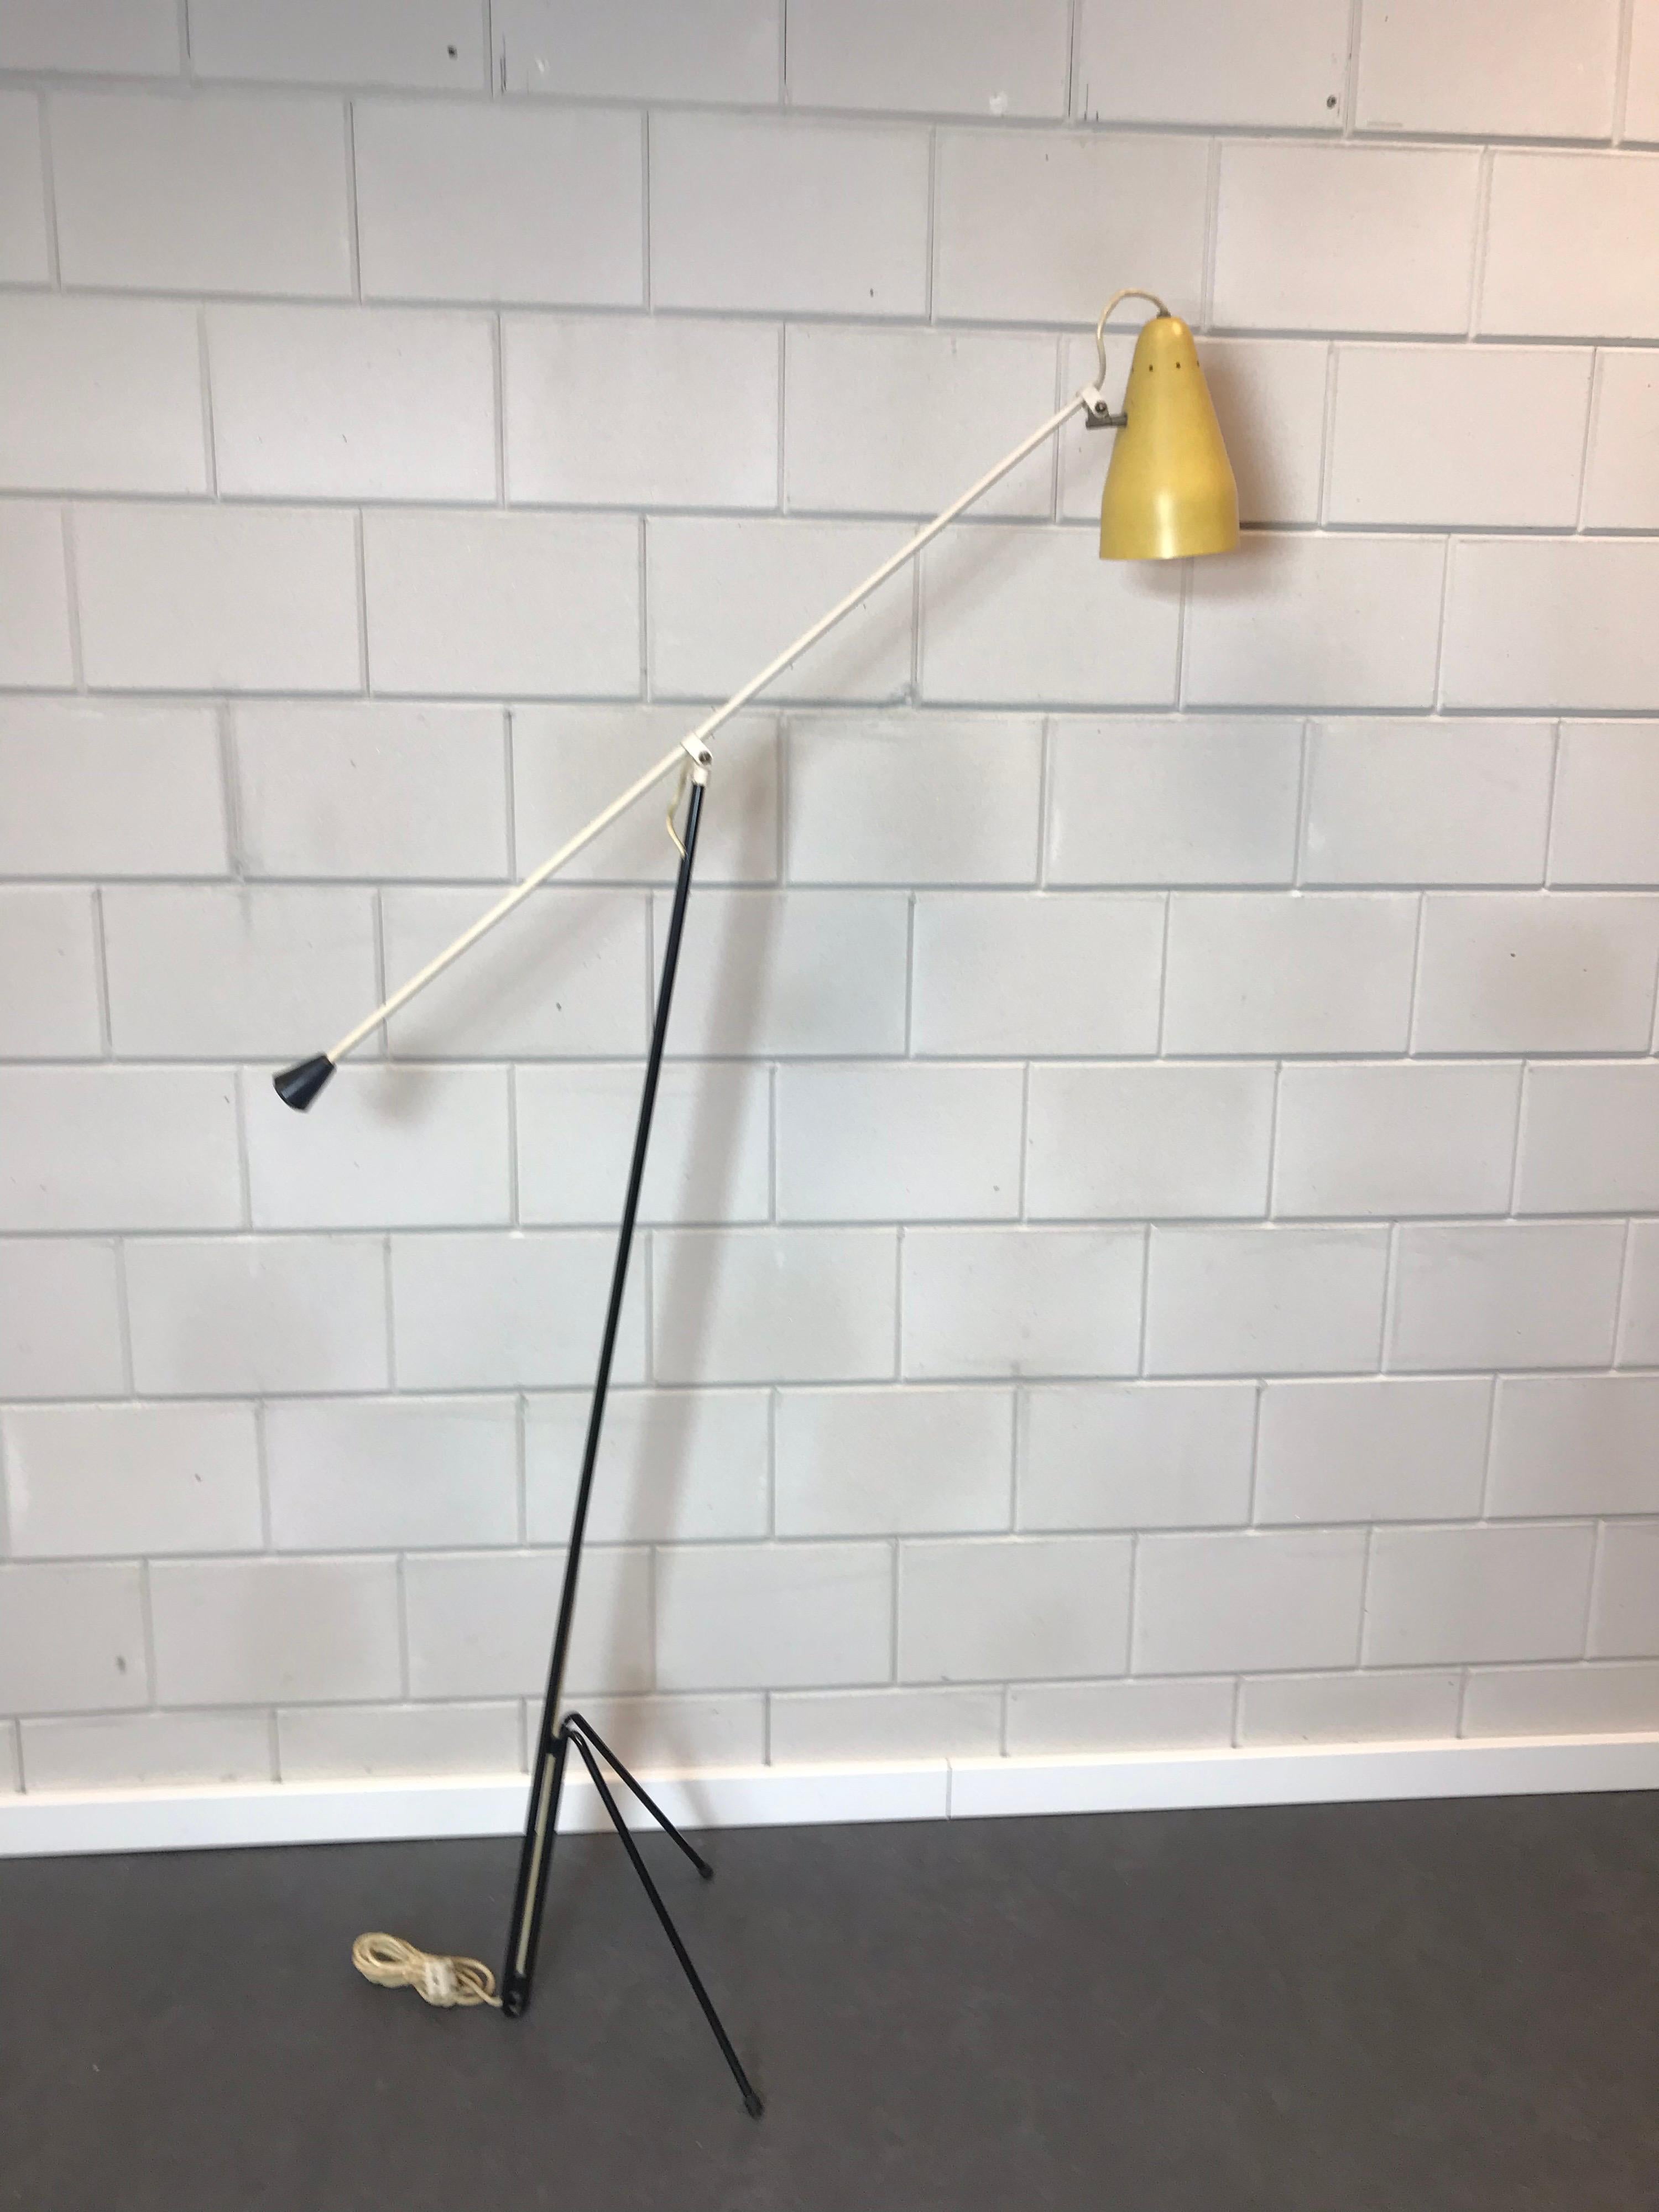 Rare floor lamp so called number 6320 designed by Wim Rietveld for the Dutch company Gispen.
Designed in 1953 and still standing strong.
Lamp on black tripod metal base with white adjustable arm and lacquered original yellow hood with holes that